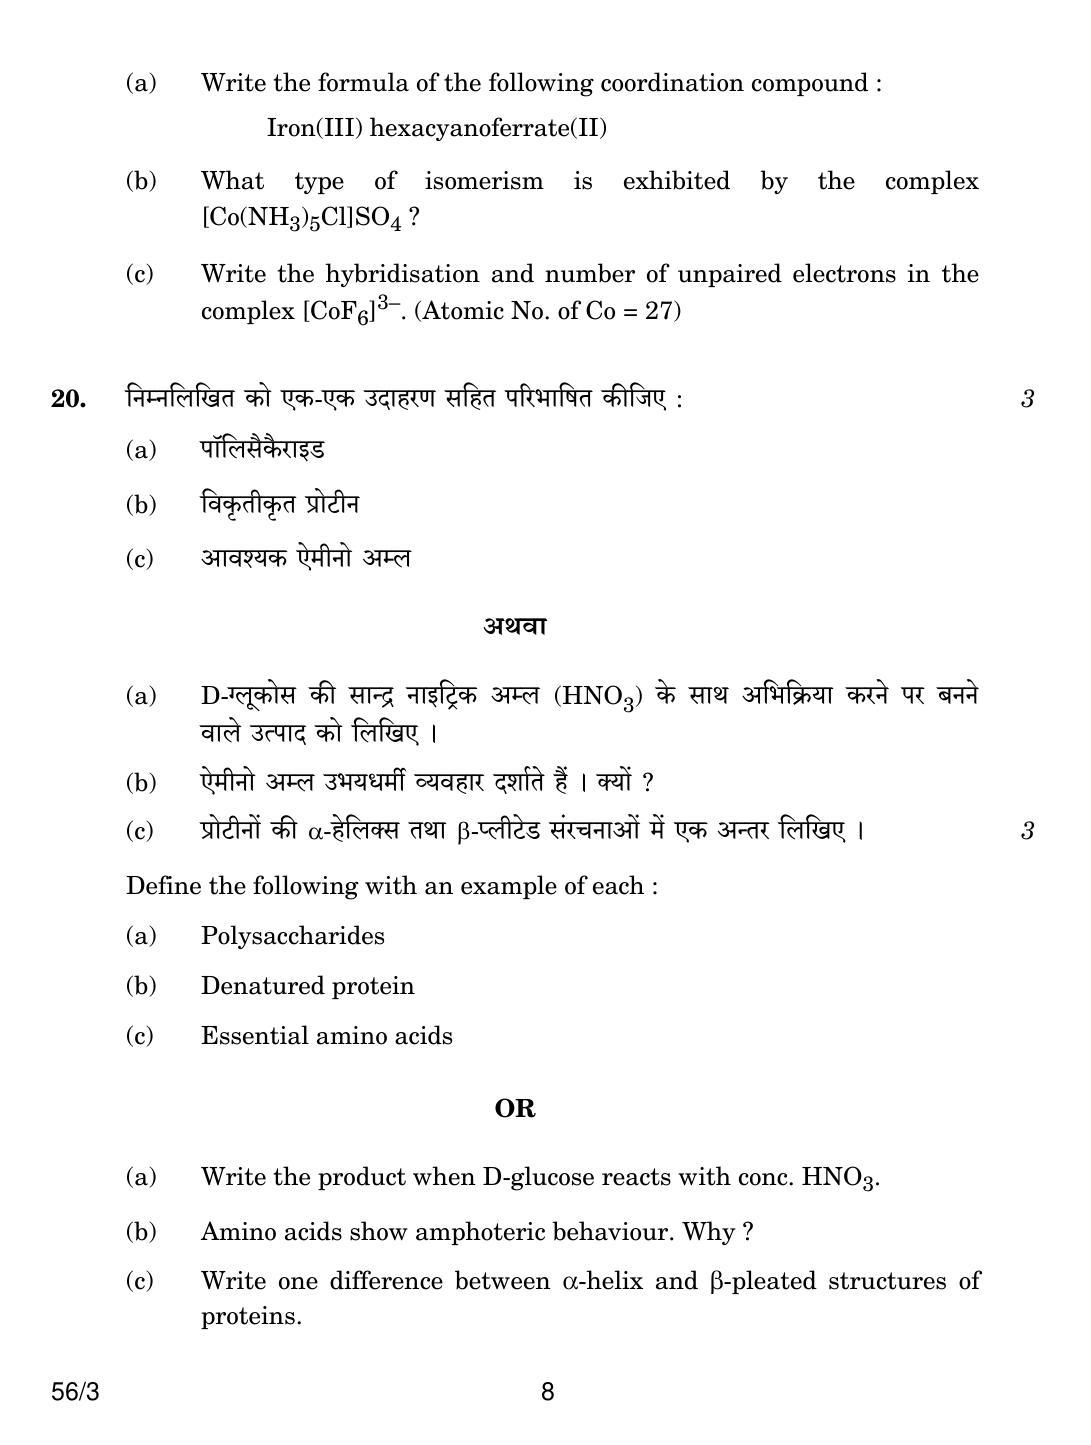 CBSE Class 12 56-3 CHEMISTRY 2018 Question Paper - Page 8